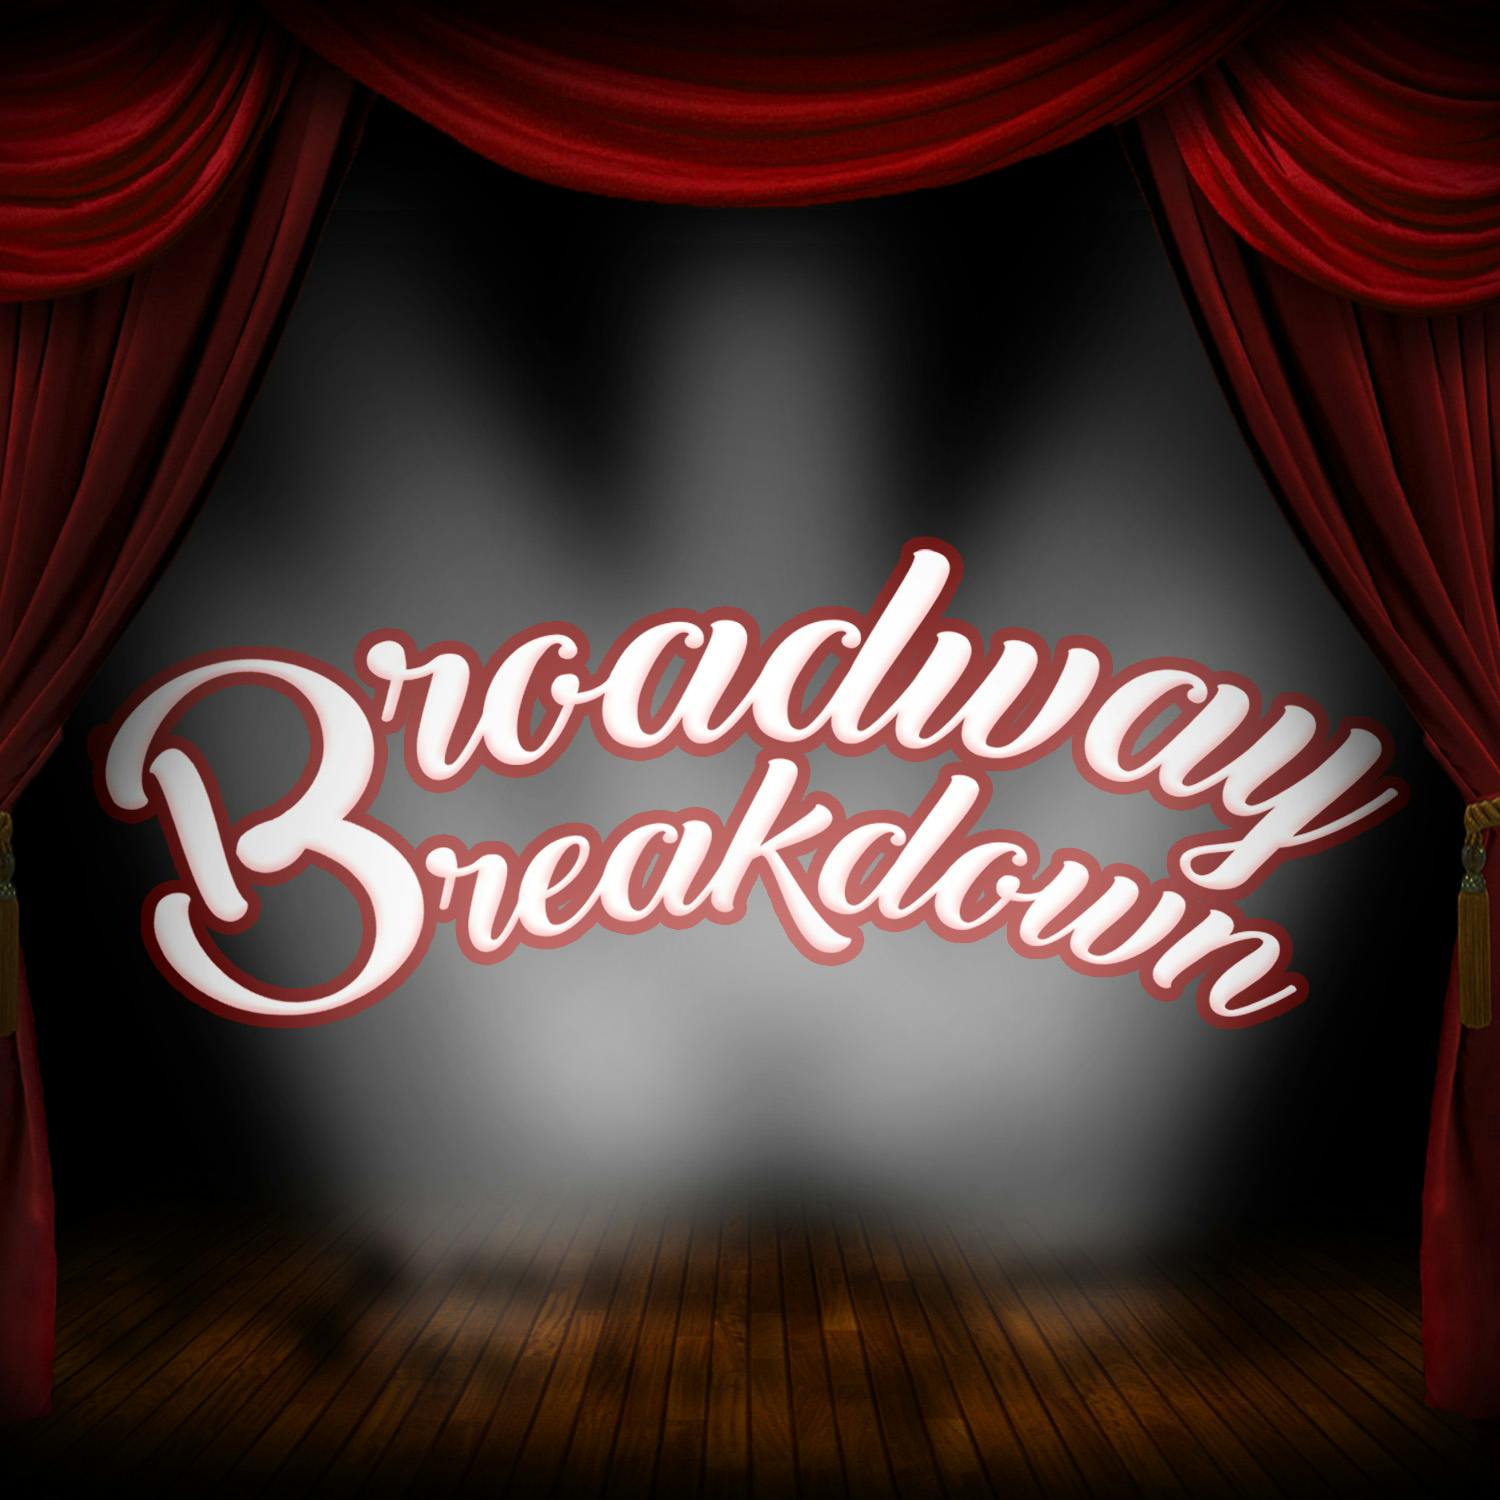 Hair Musical Discussion – Broadway Breakdown